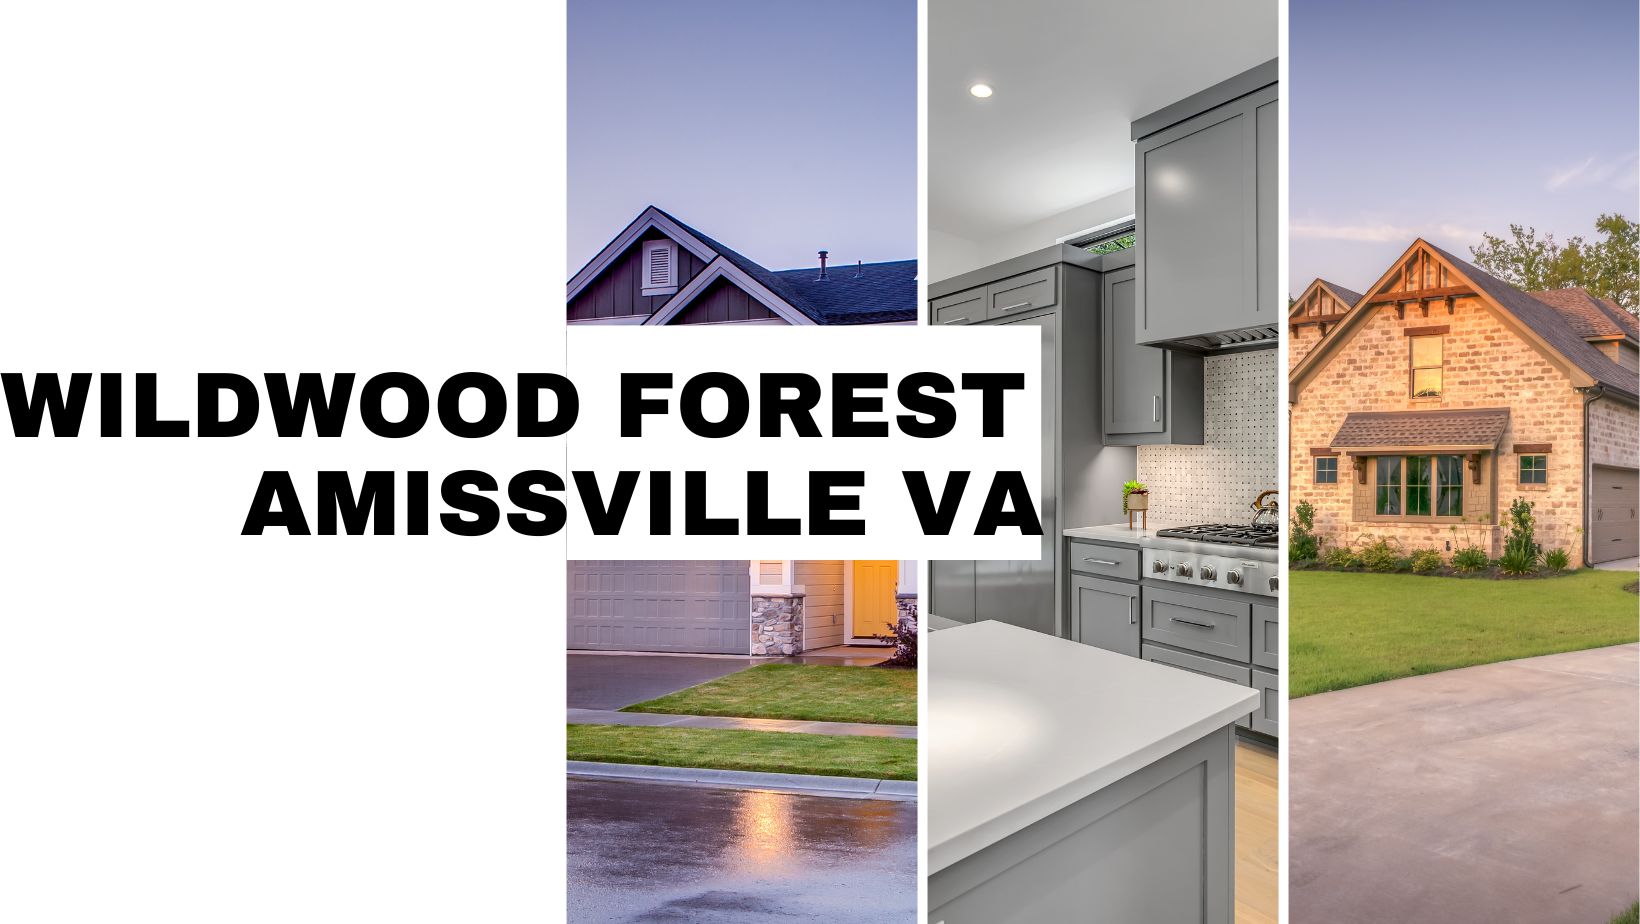 Wildwood Forest Amissville VA Homes for Sale